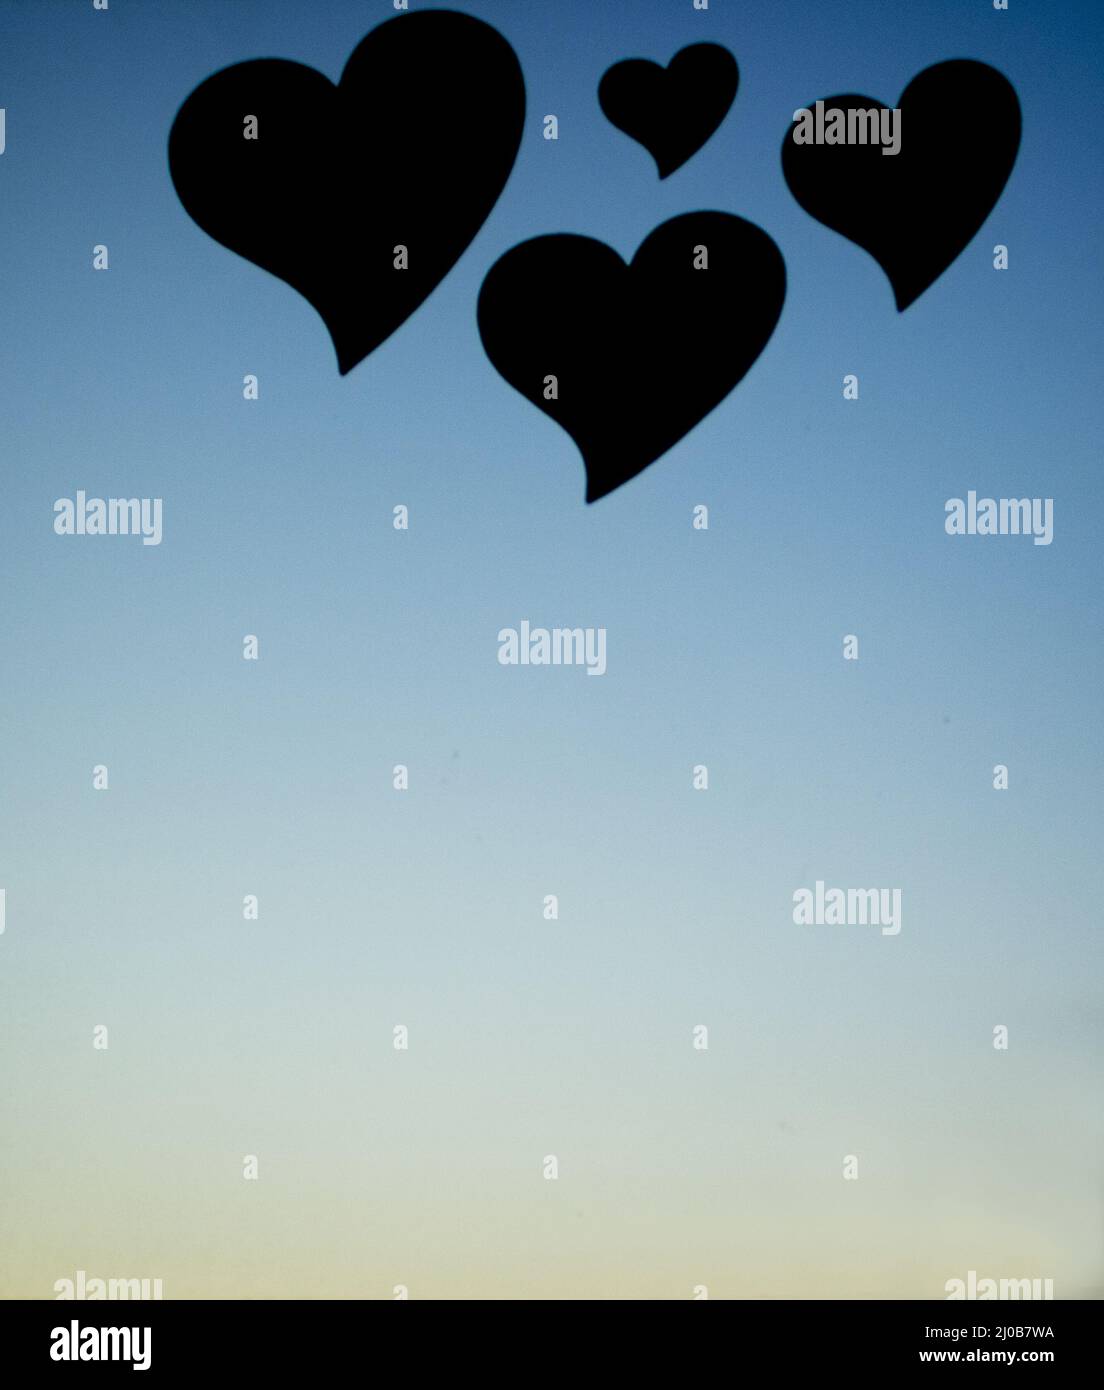 Four love hearts in silhouette with sunset sky background Stock Photo